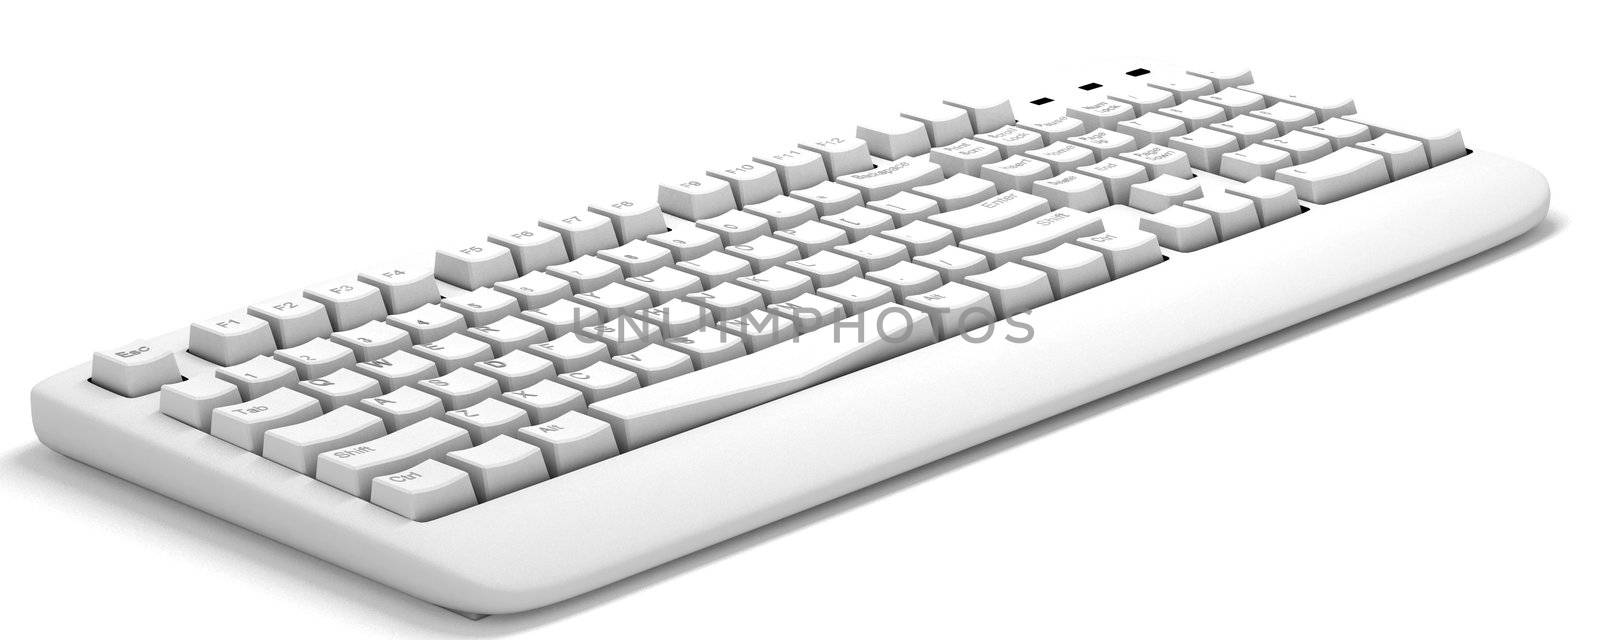 3d computer keyboard isolated on a white background